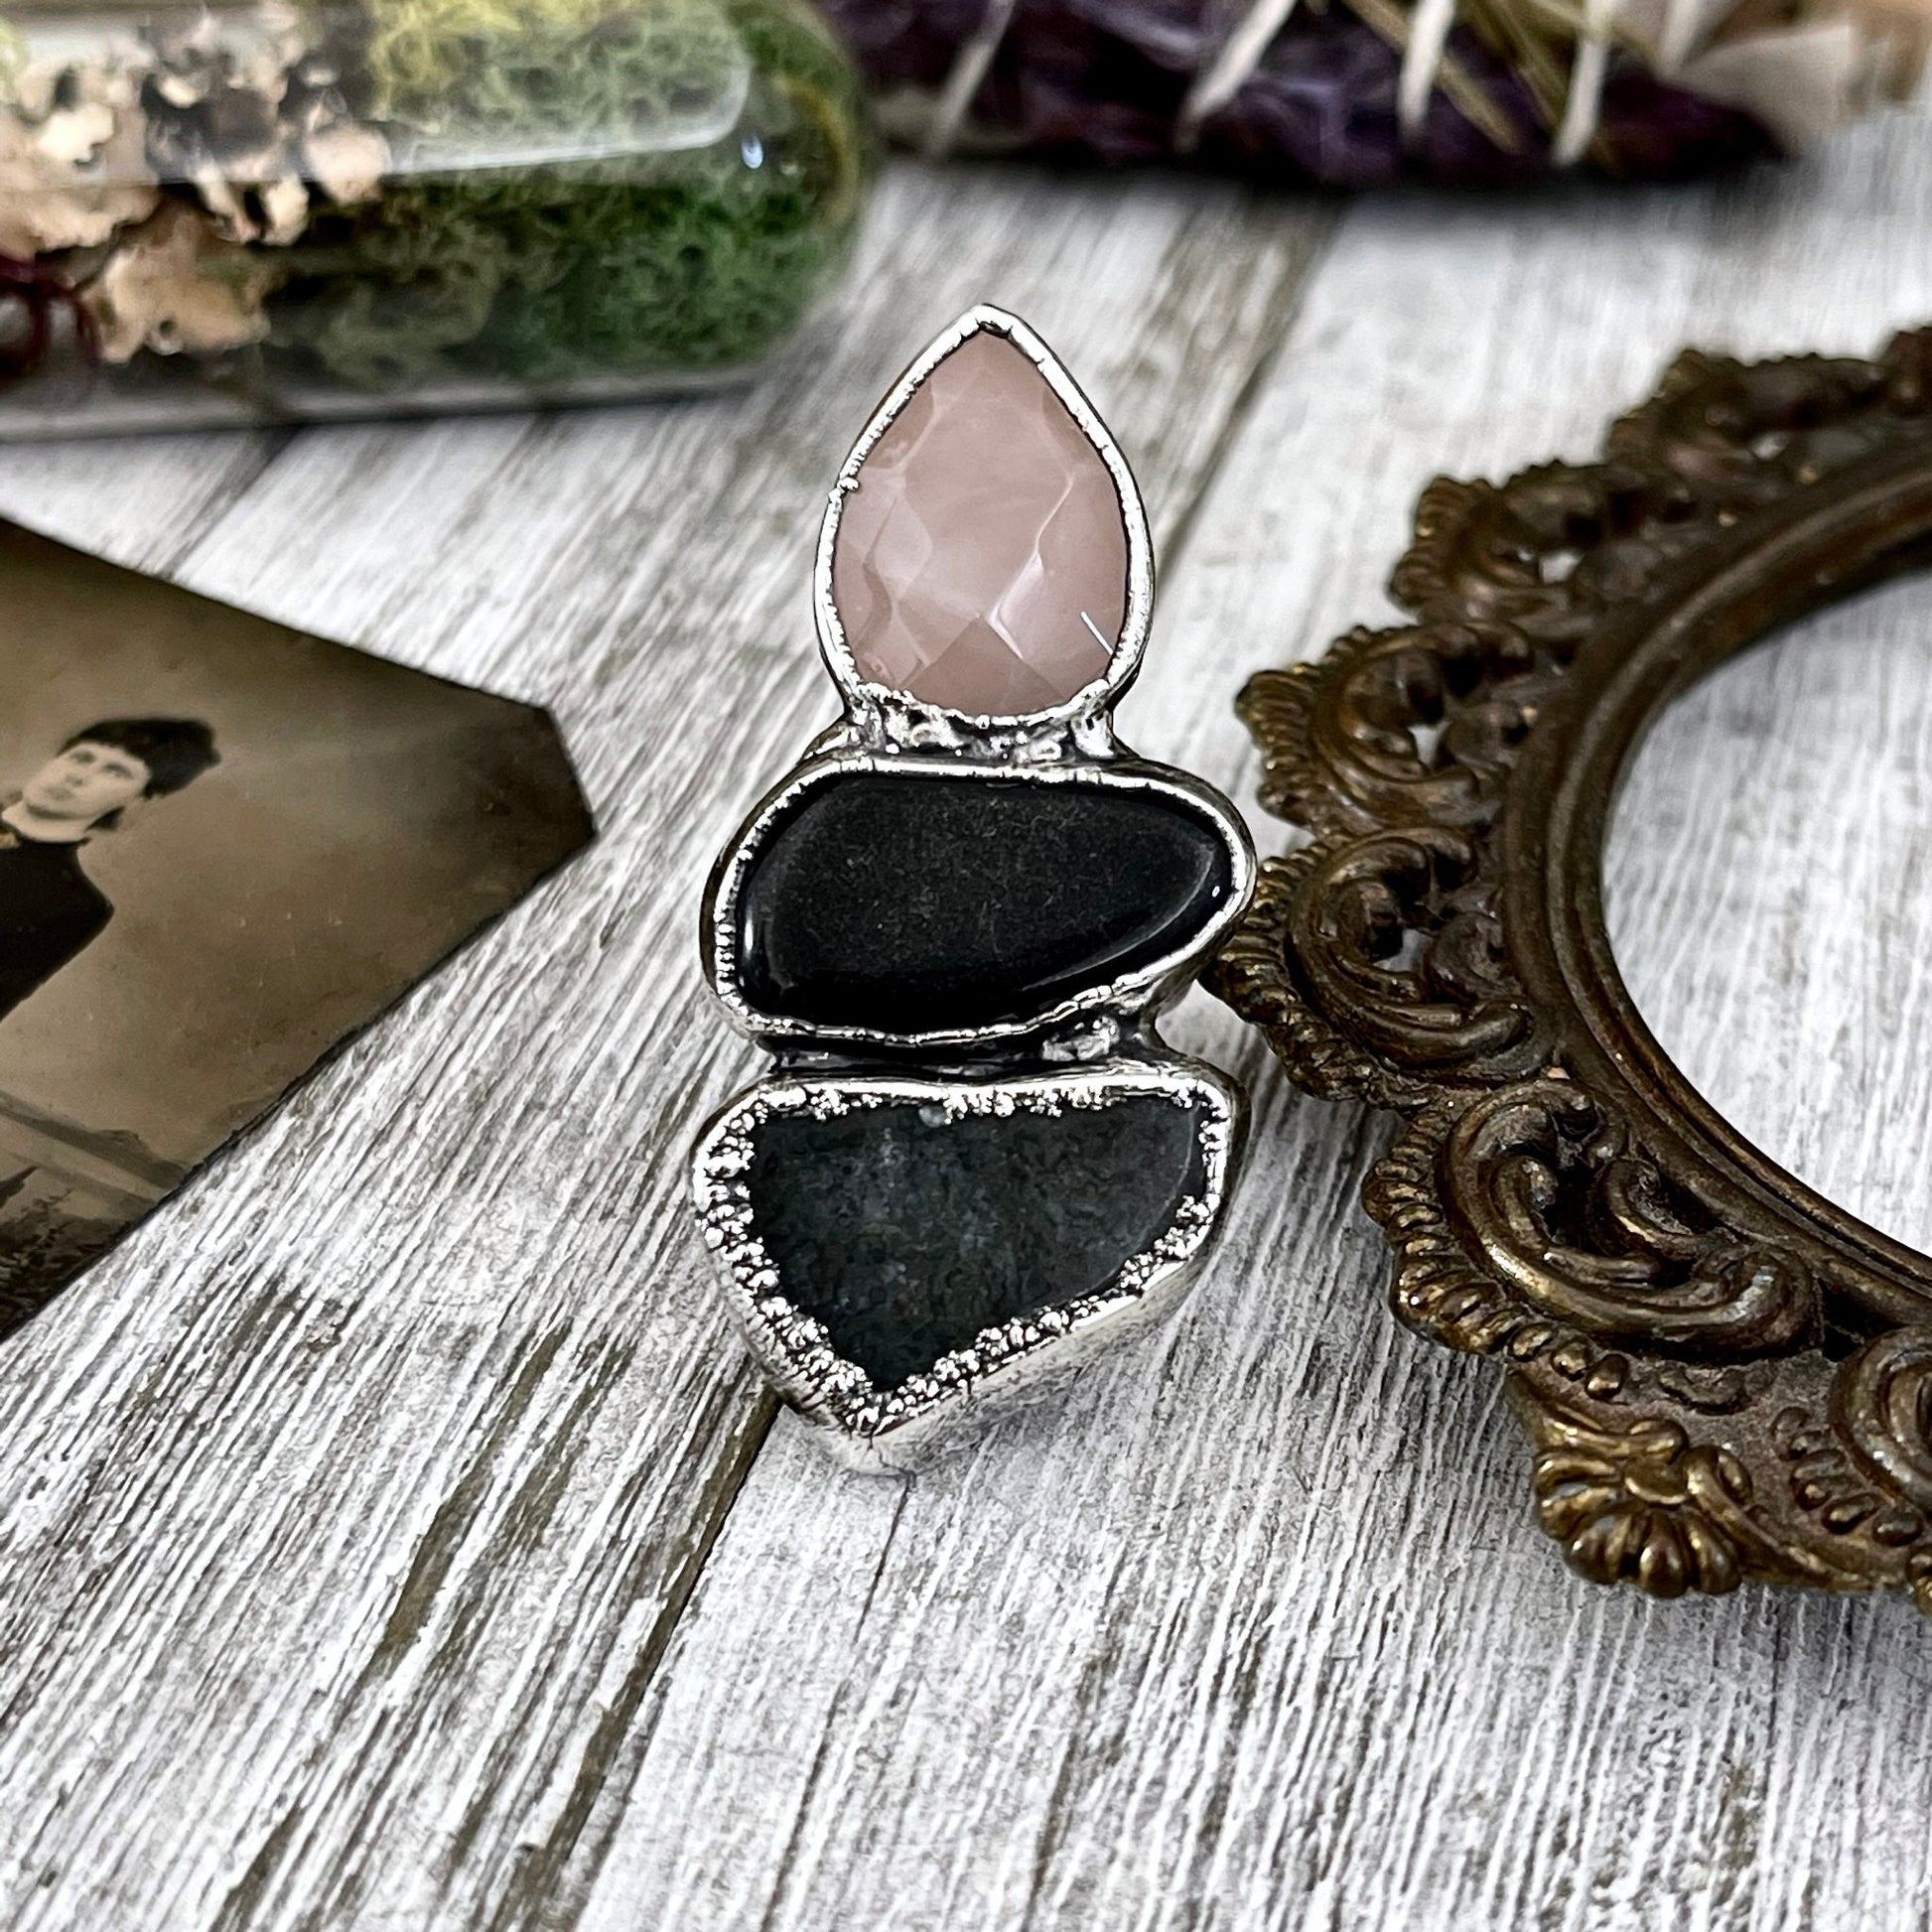 Size 6 Crystal Ring - Three Stone Ring Black Onyx Rose Quartz Moss Agate Ring Silver / Foxlark Collection - One of a Kind / Crystal Jewelry